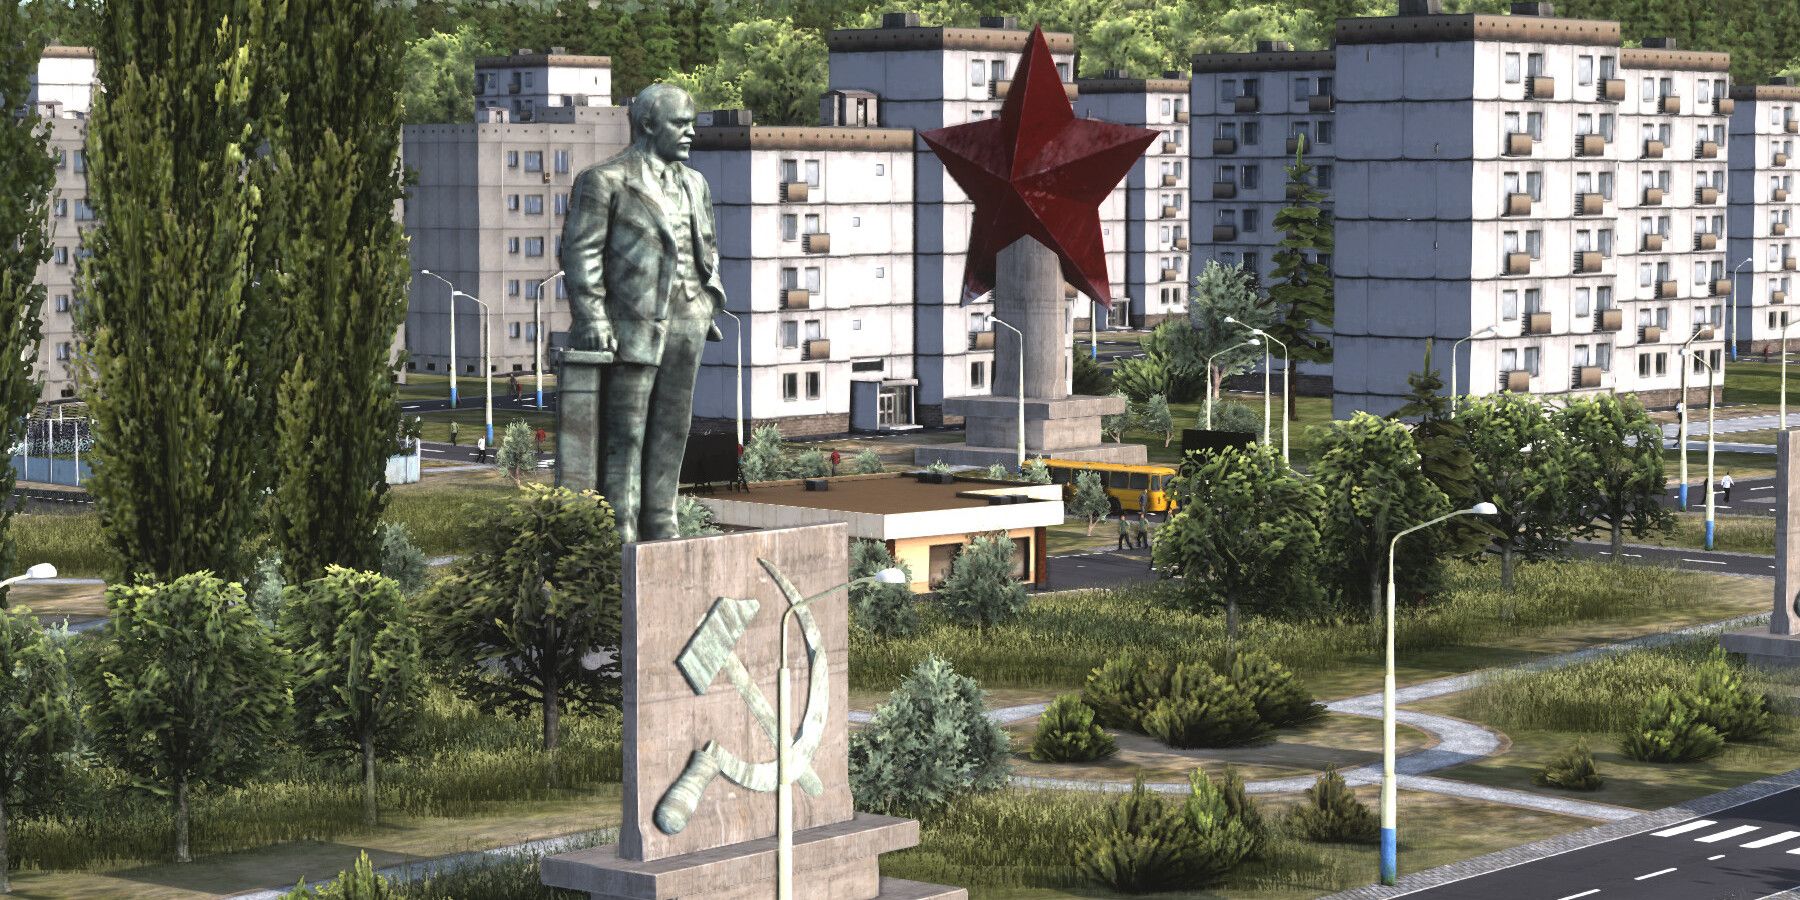 Workers-and-Resources-Soviet-Republic-Gameplay-Soviet-Cityscape